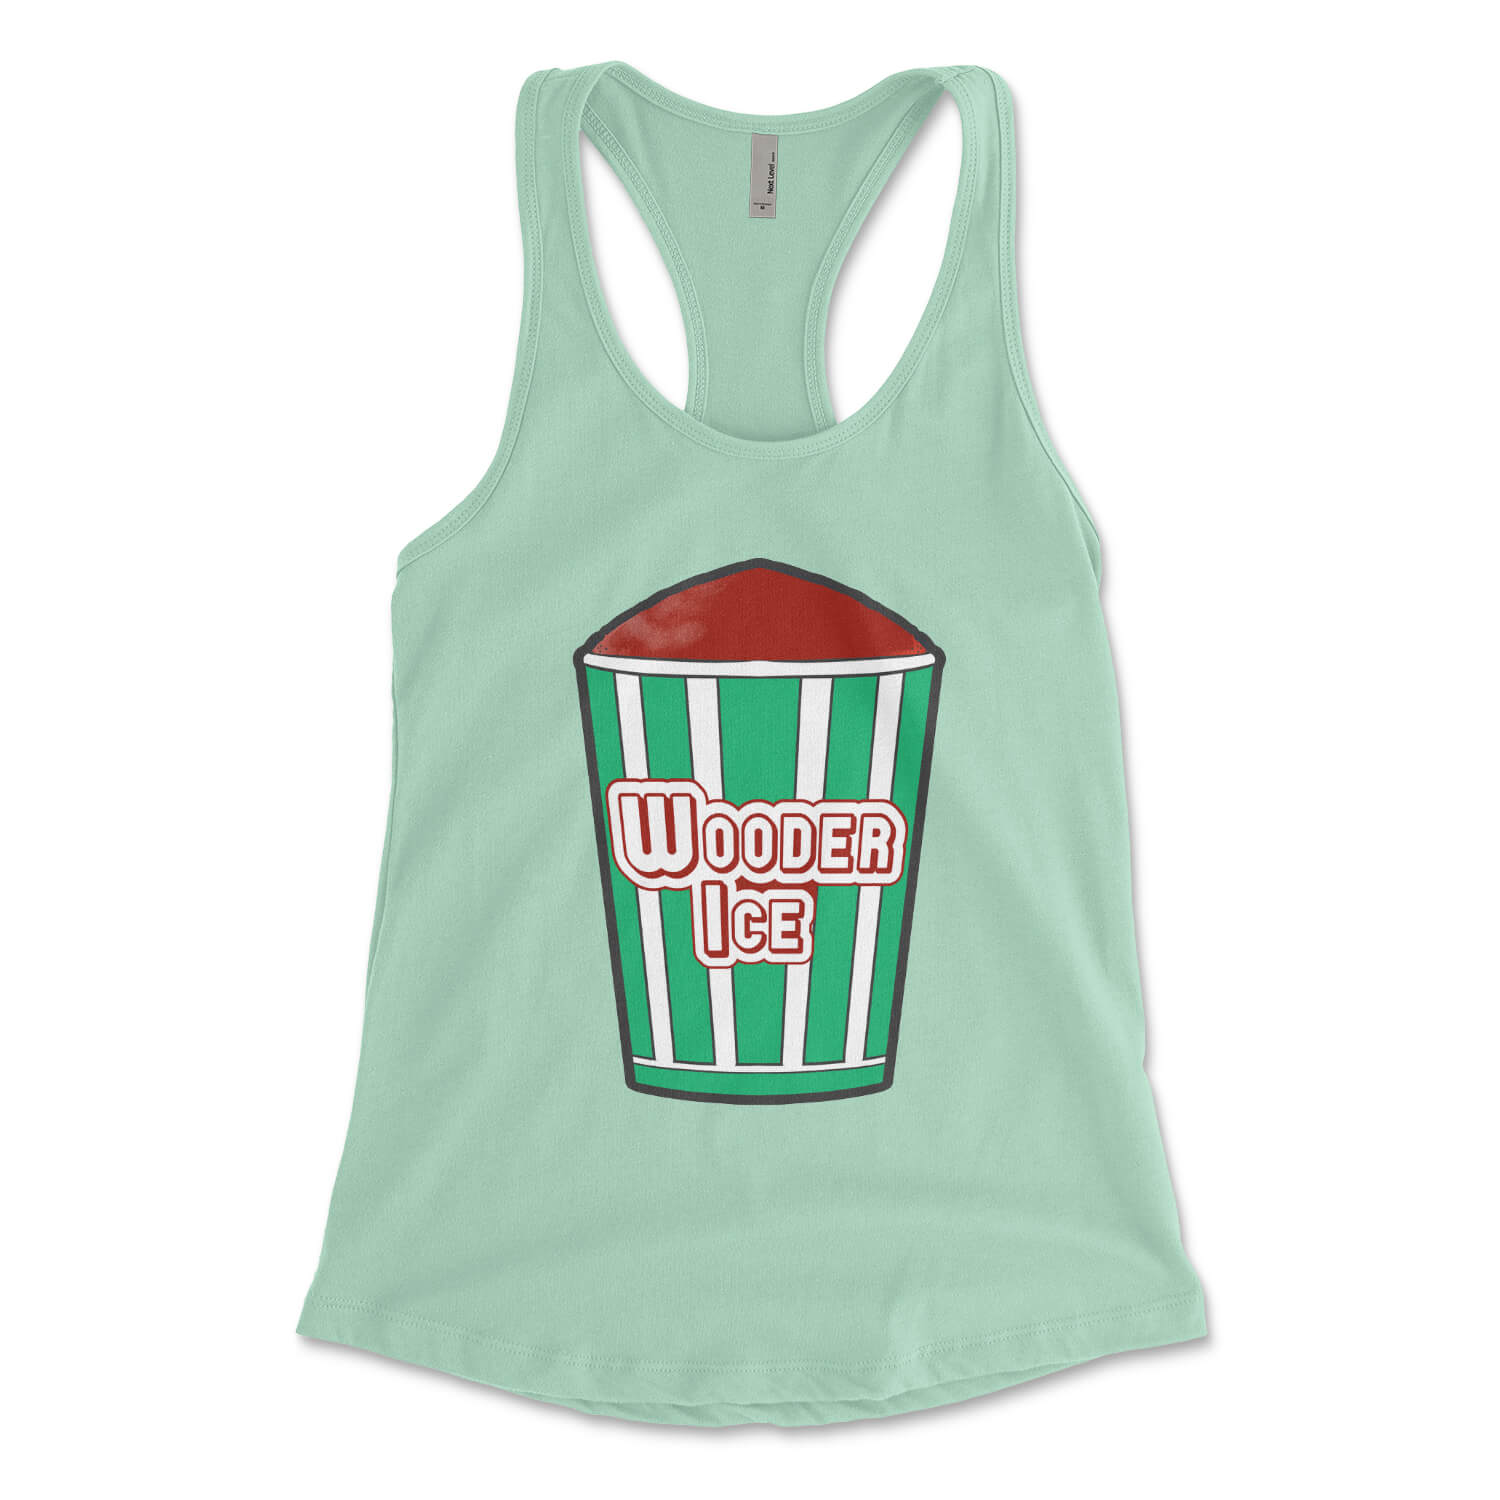 Philadelphia Philly water ice wooder ice mint green womens racerback tank top from Phillygoat